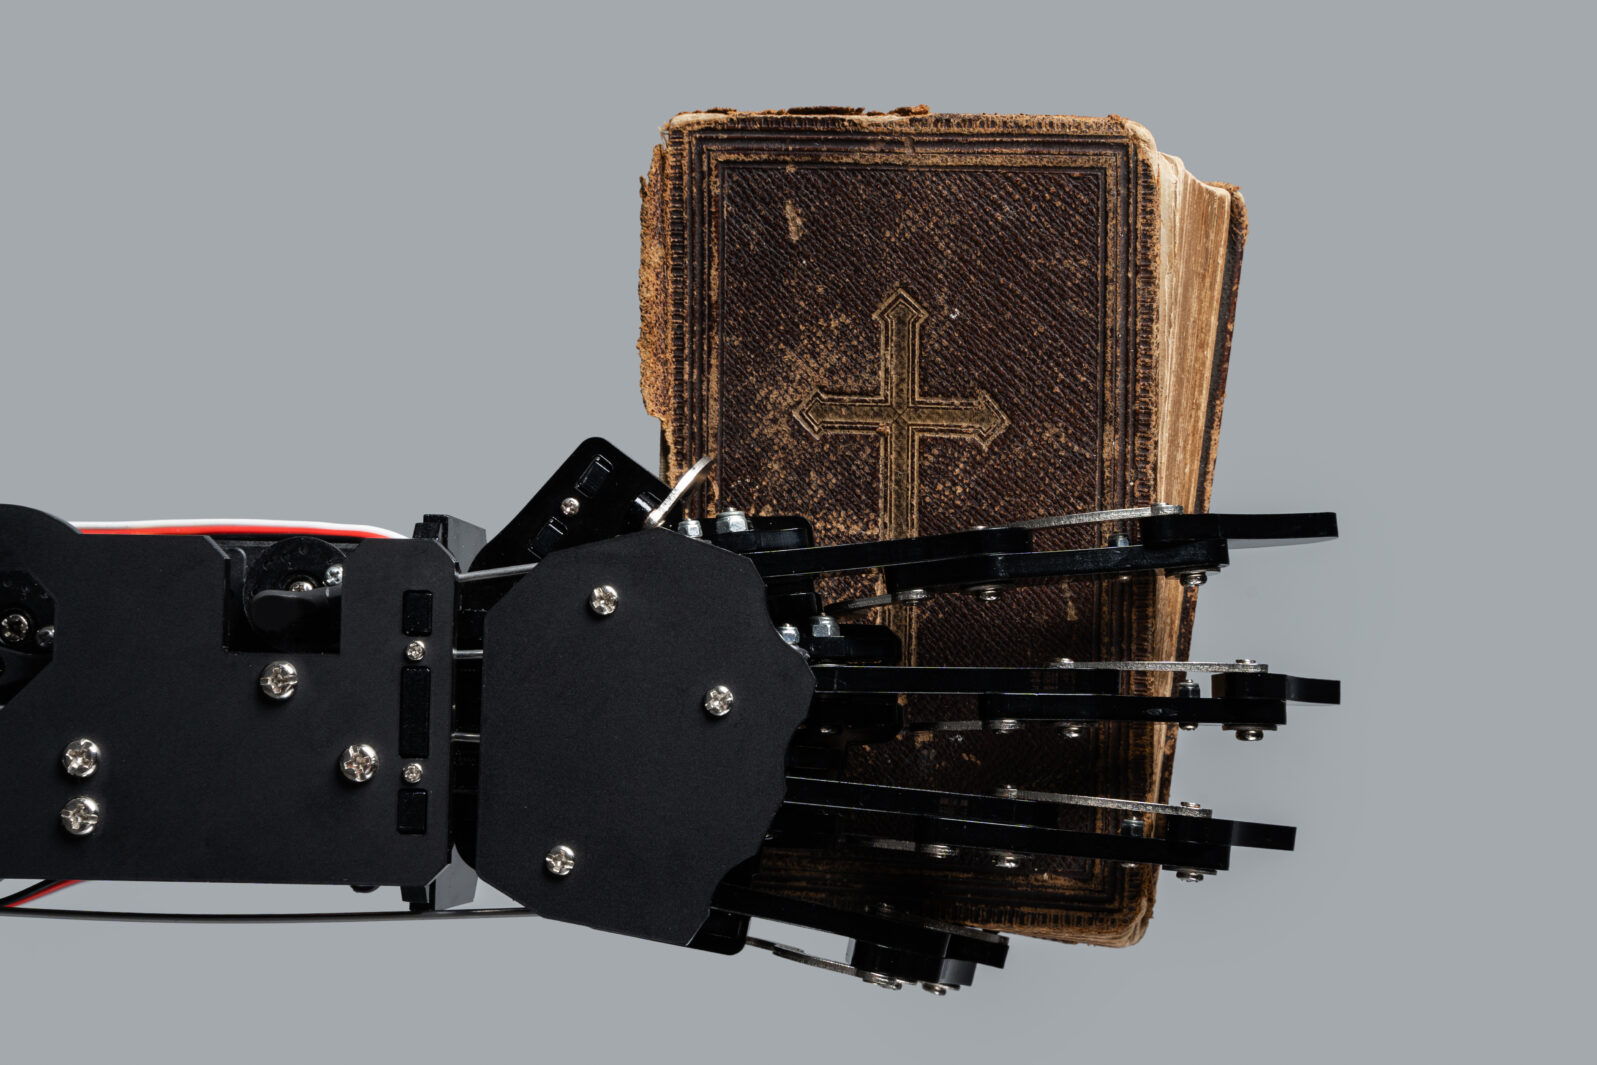 Real robot's hand with ancient Bible. Concepts of artificial intelligence development and machine learning